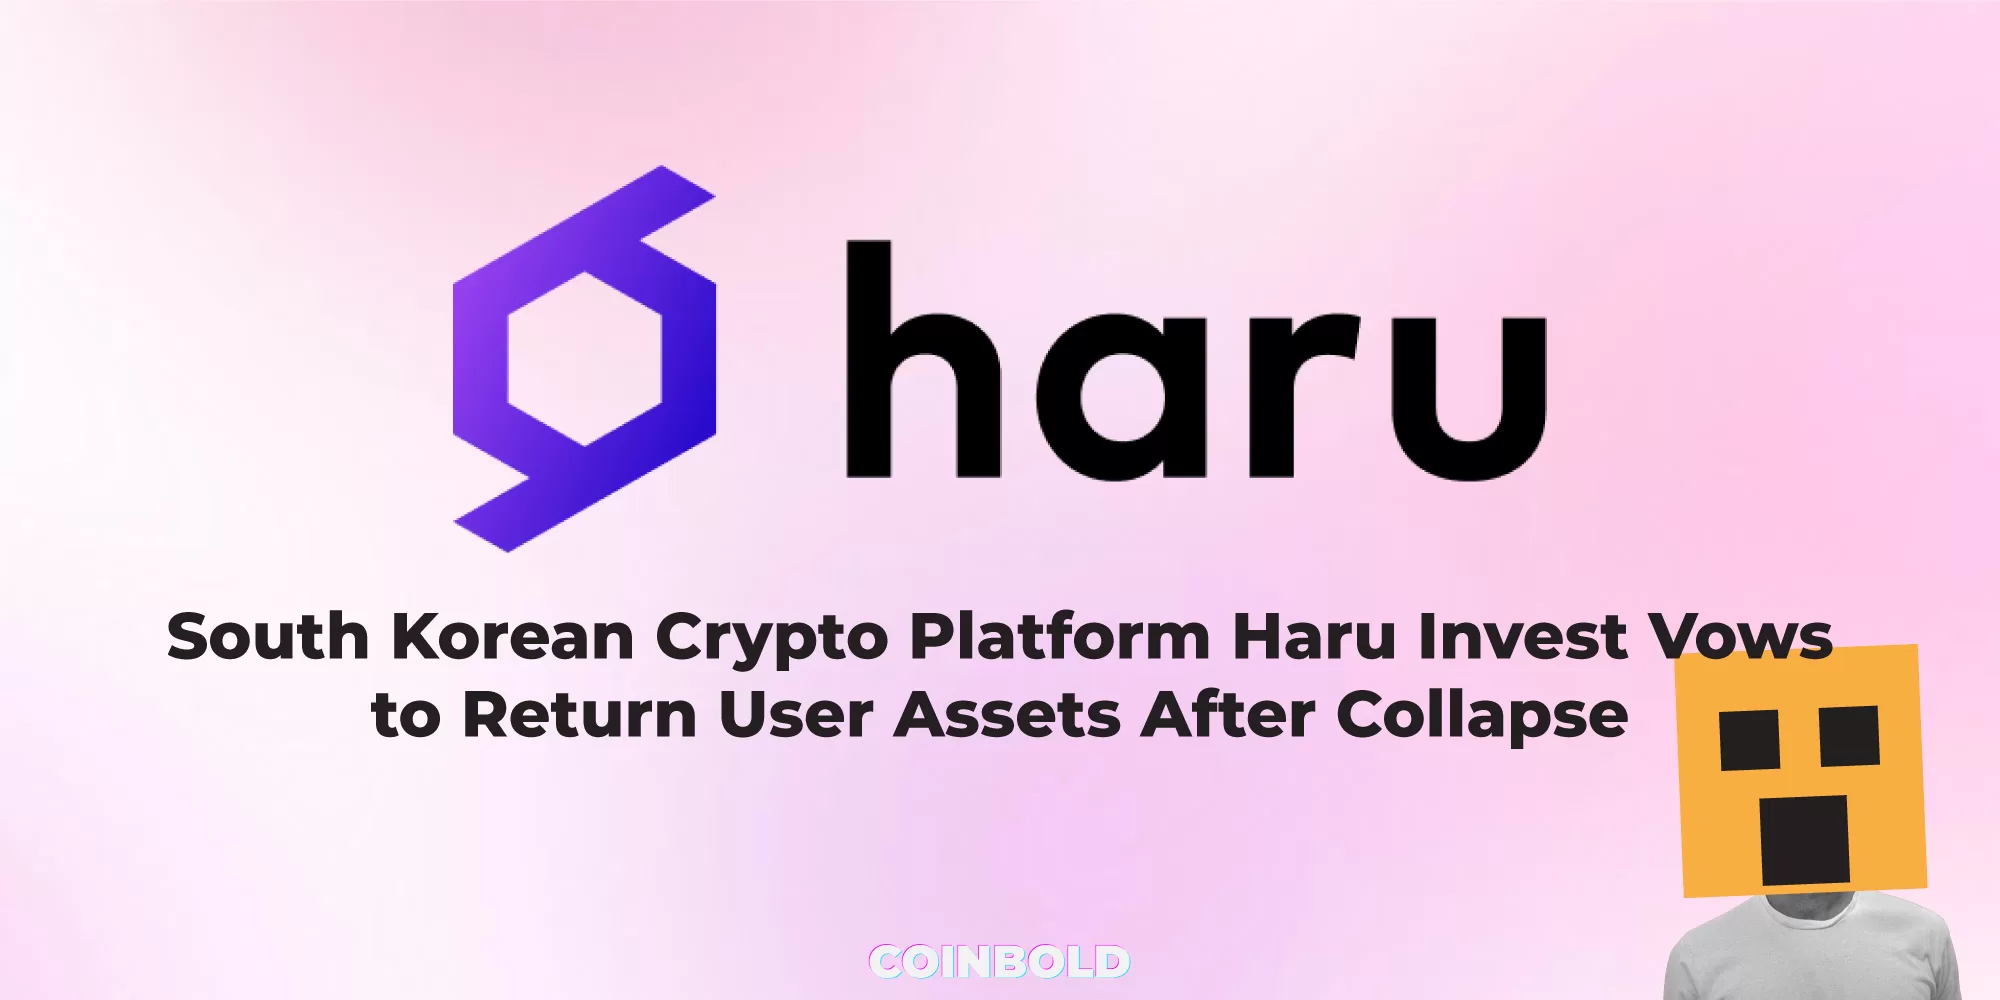 South Korean Crypto Platform Haru Invest Vows to Return User Assets After Collapse